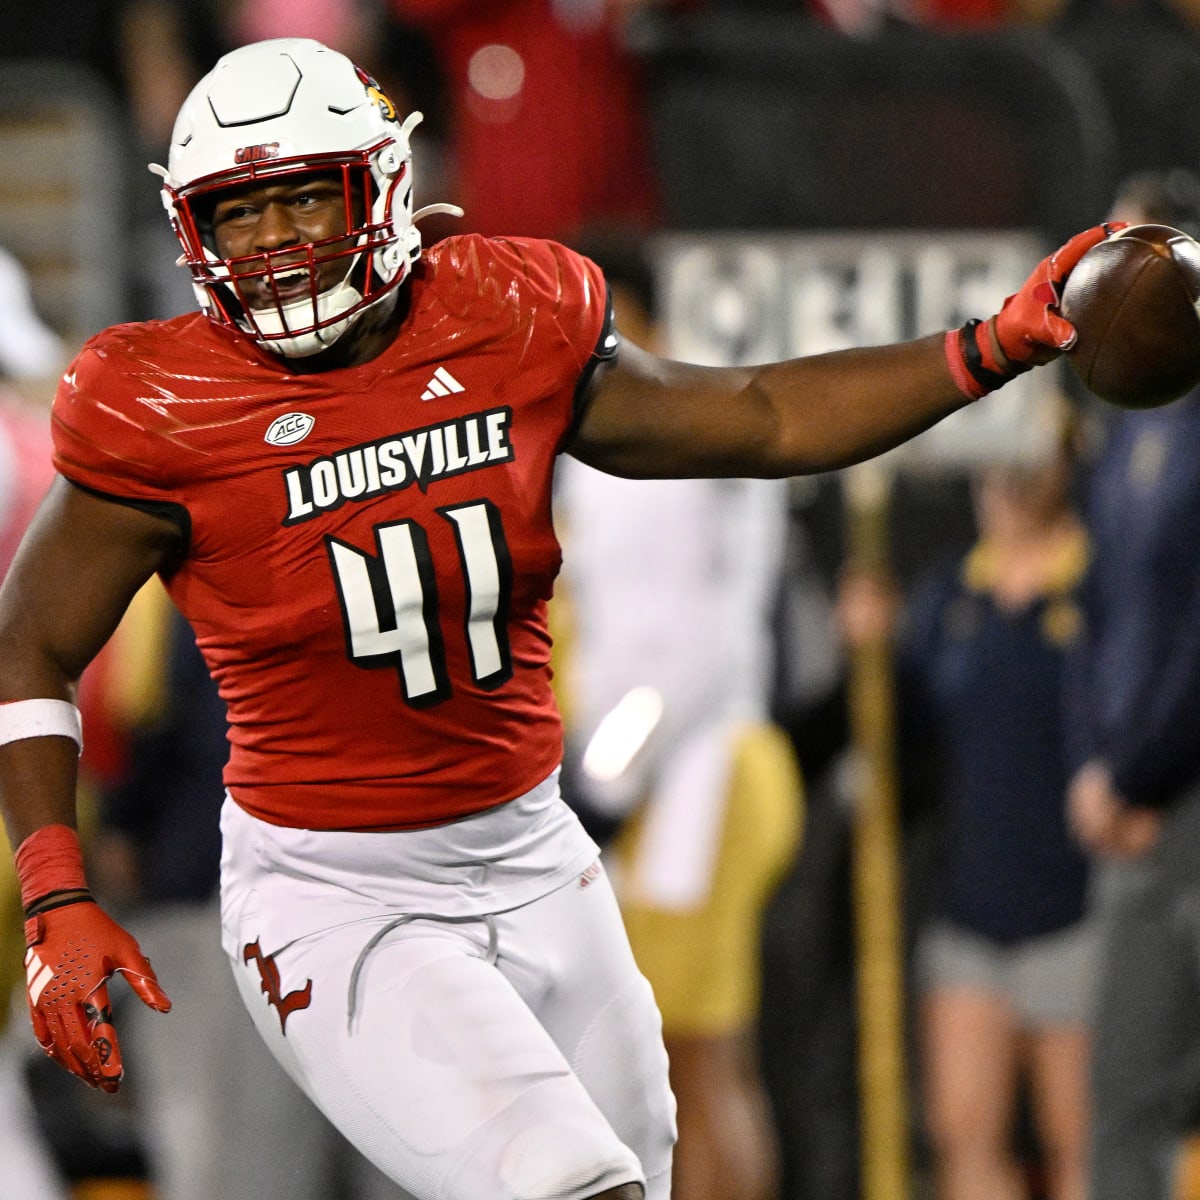 How to watch Louisville vs. Pitt football without cable: kickoff